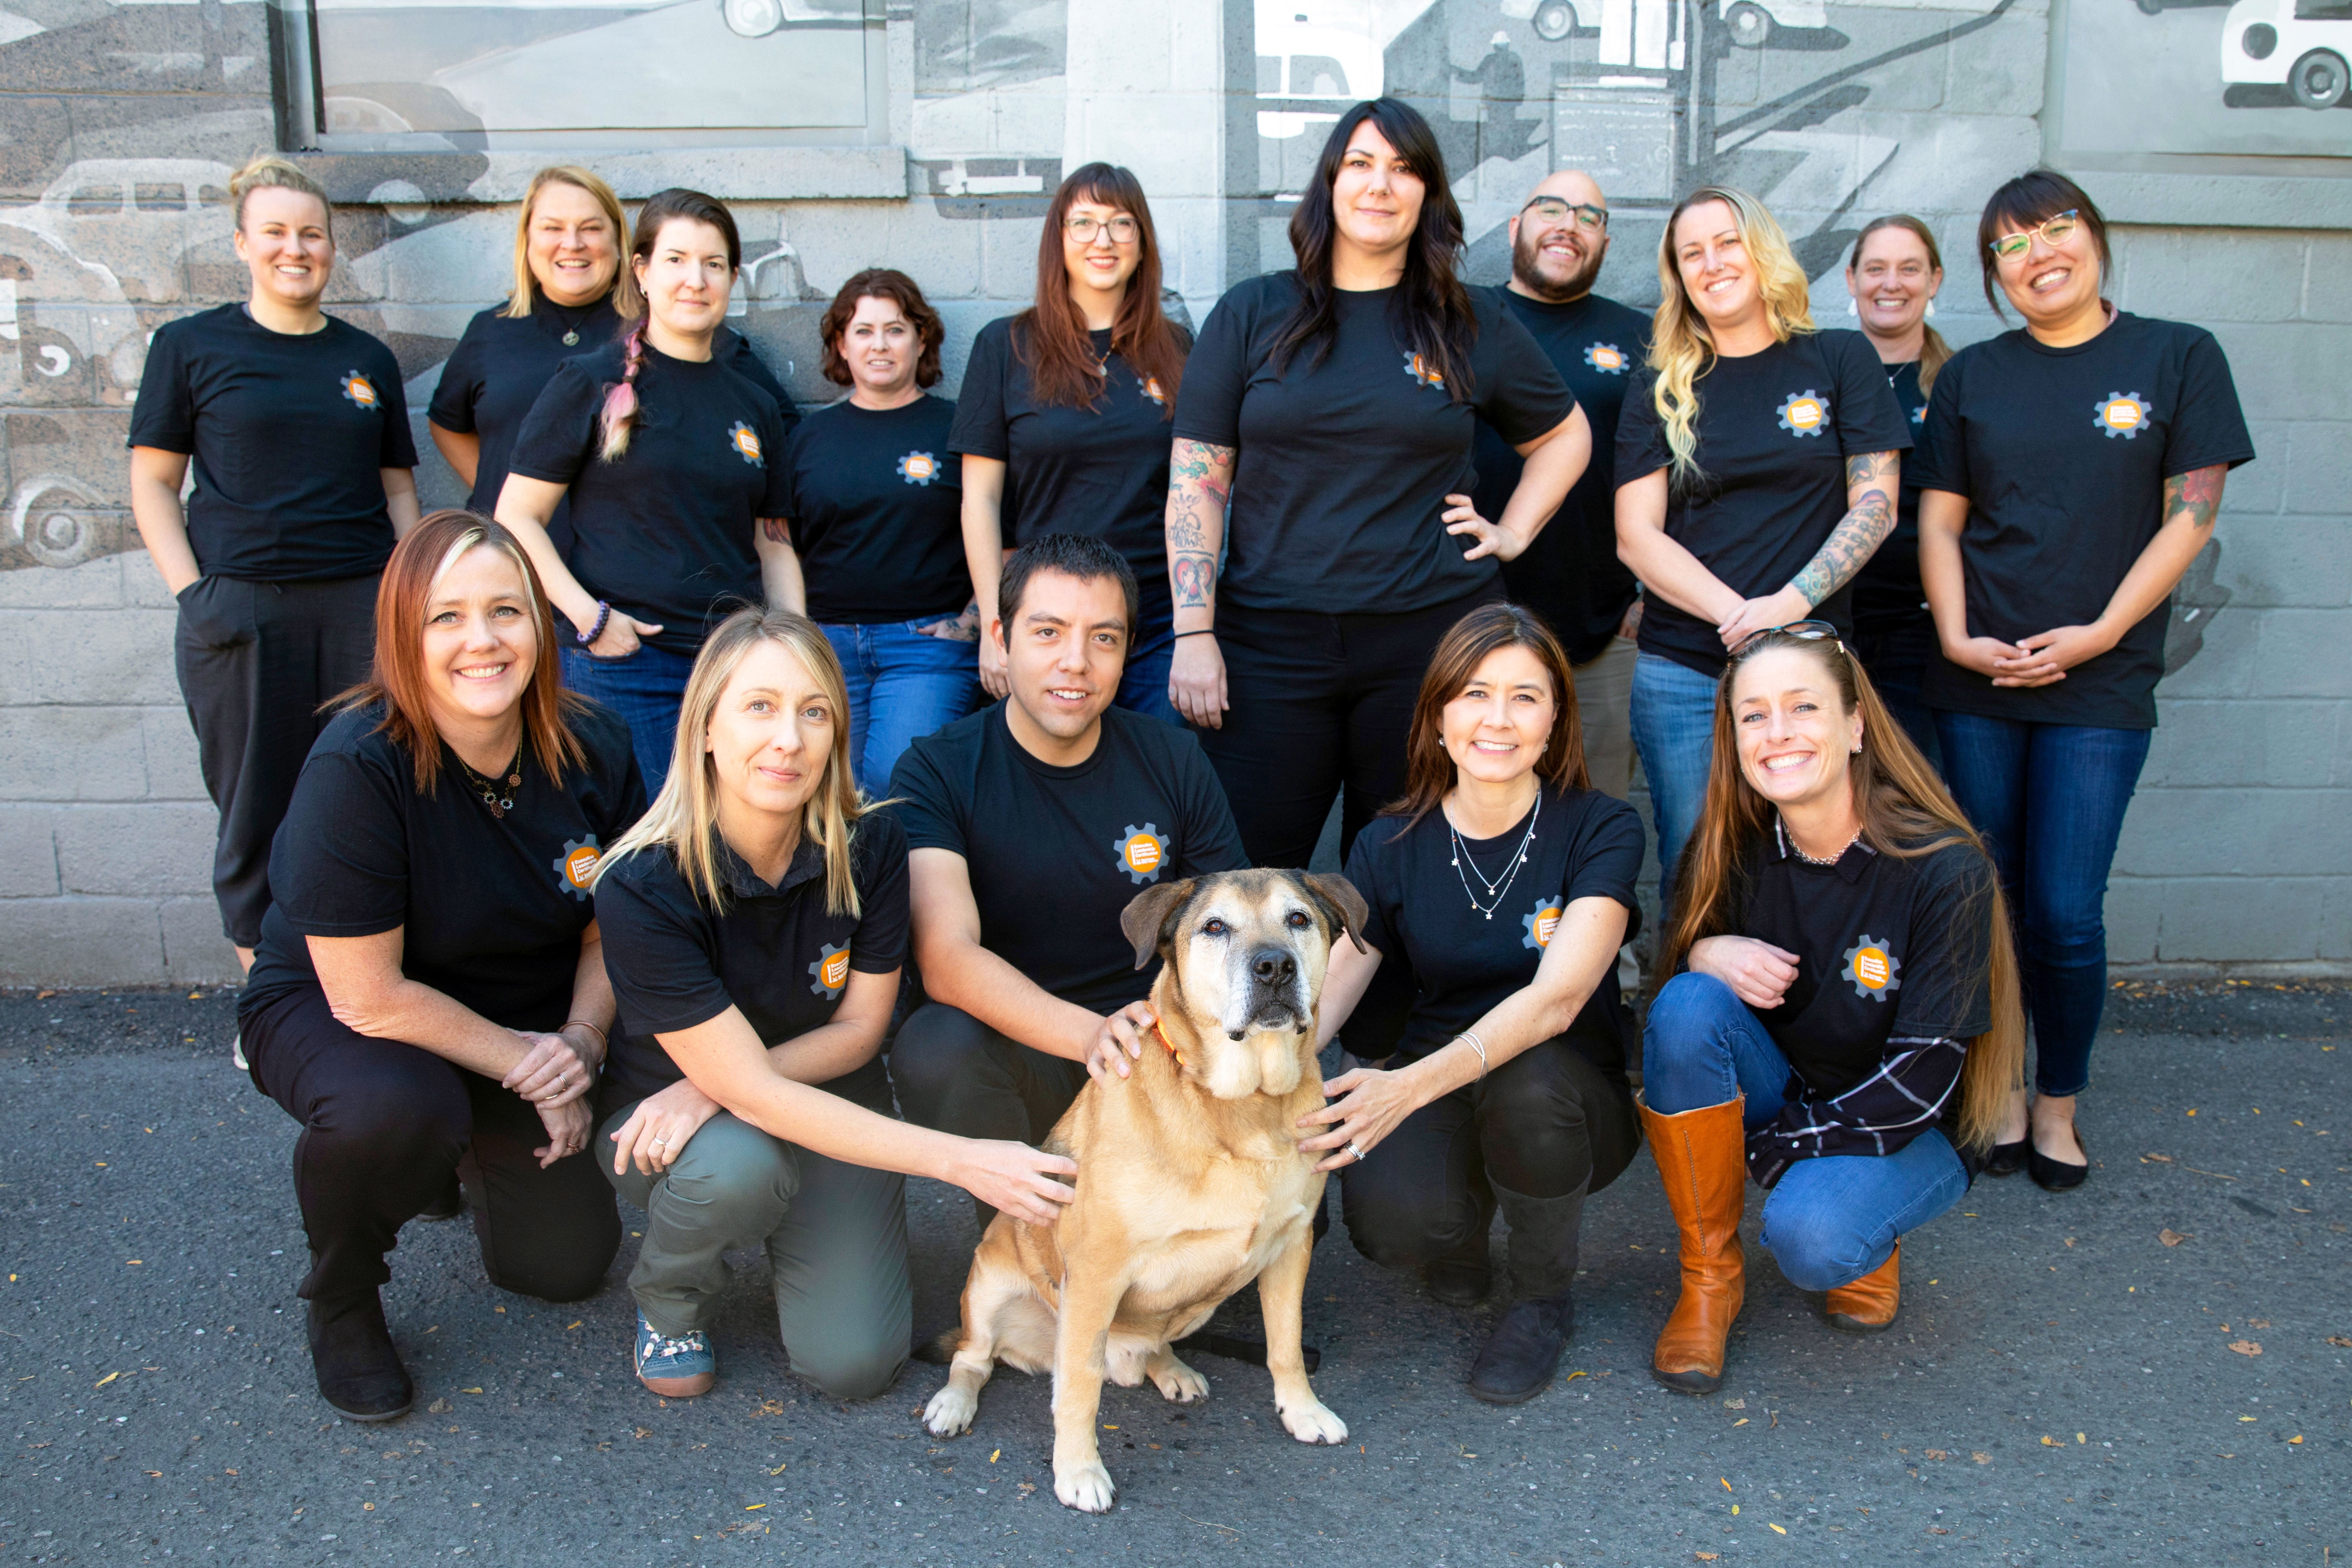 Group shot of first graduates from the SUU Executive Leadership Certification with a dog